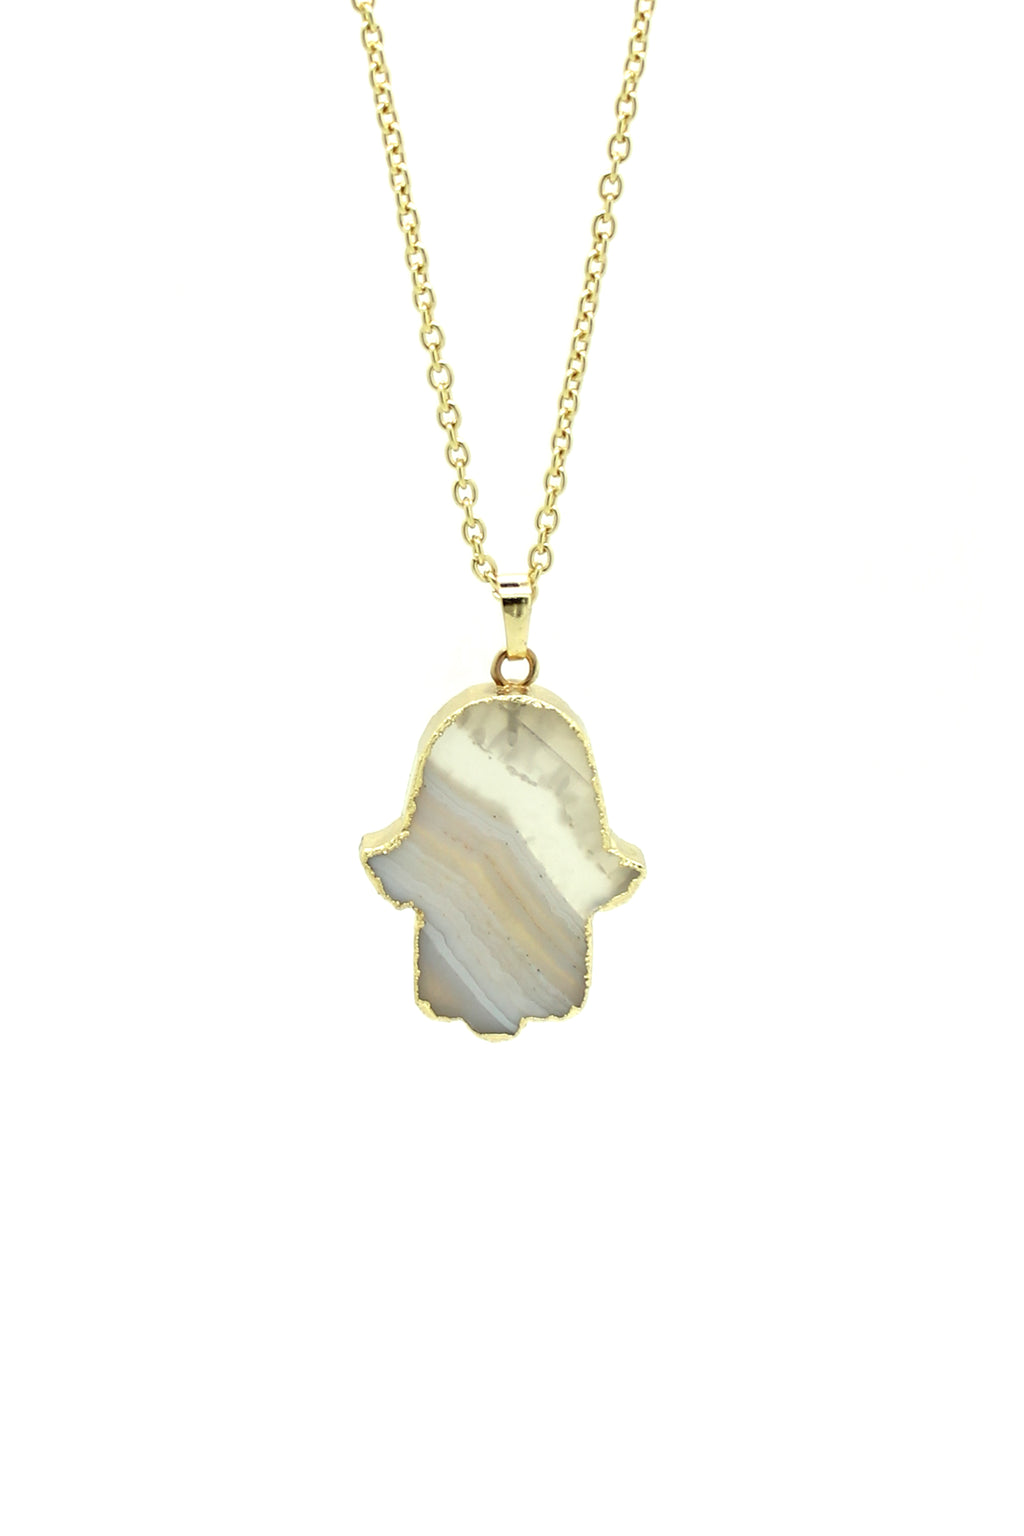 Natural agate stone necklace.